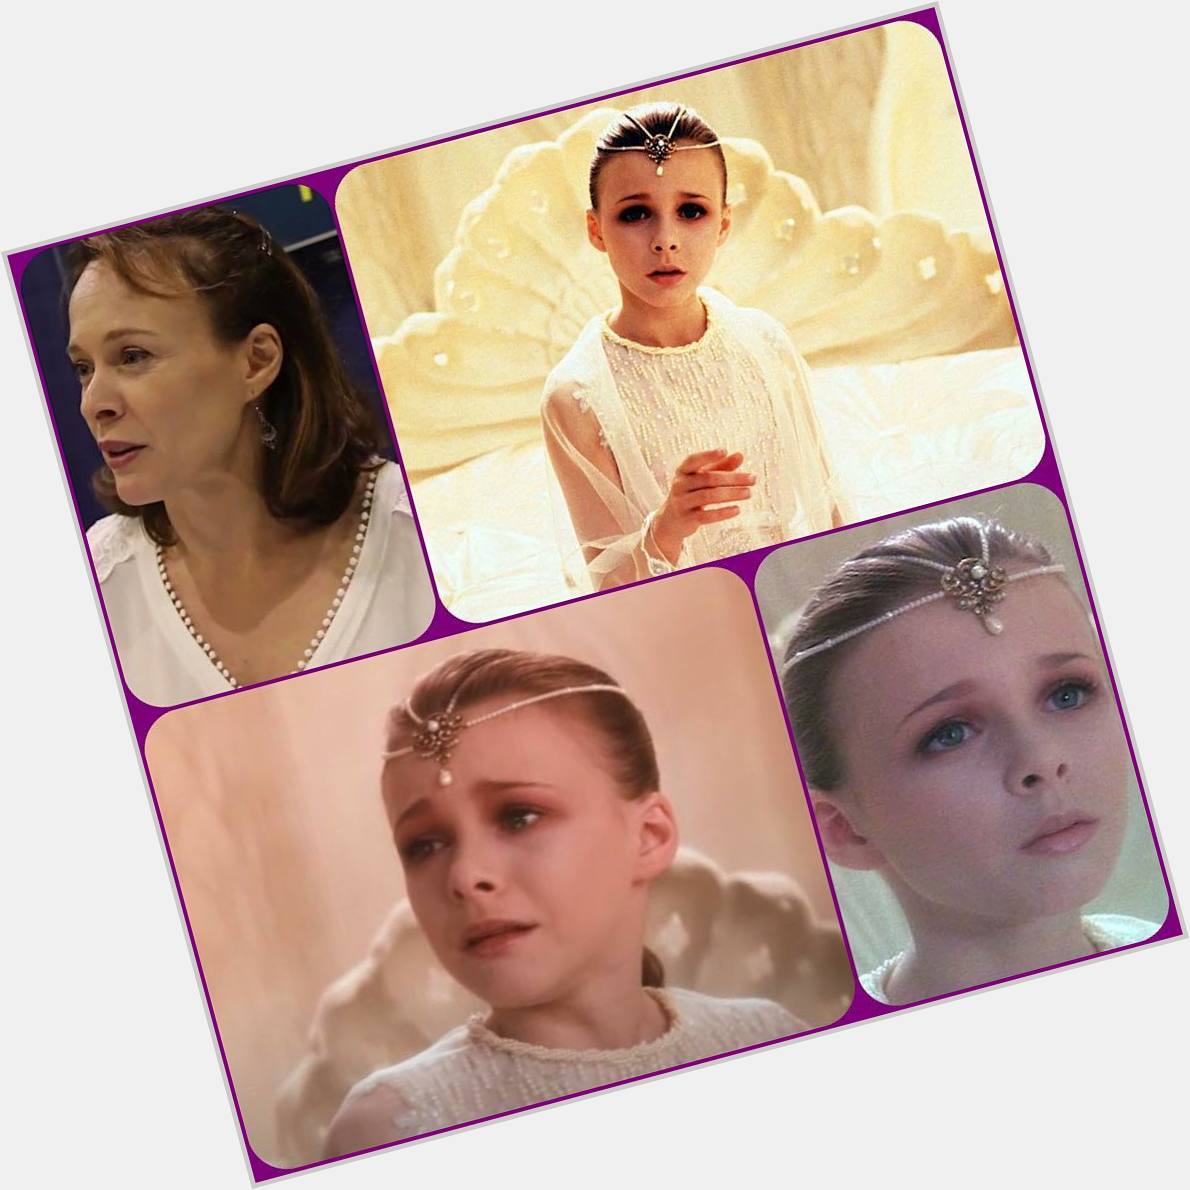 Happy Birthday Tami Stronach, who played the Childlike Princess in & more! 